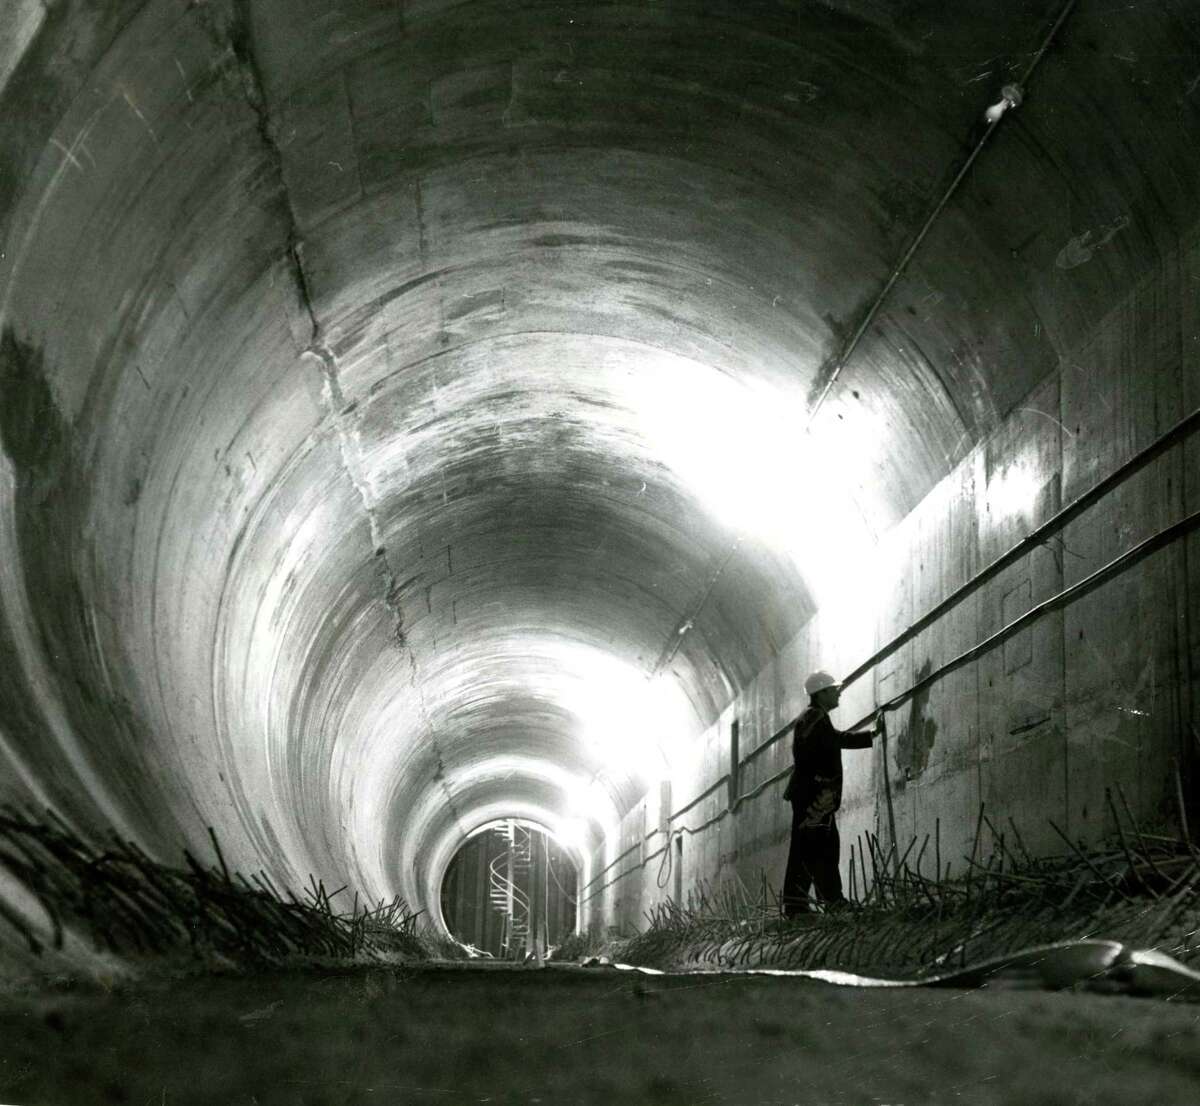 May 14, 1967: A view from inside of the first Transbay Tube segment laid down in Oakland.  The stairway in the distance is the end of the tube, and leads up to the surface.